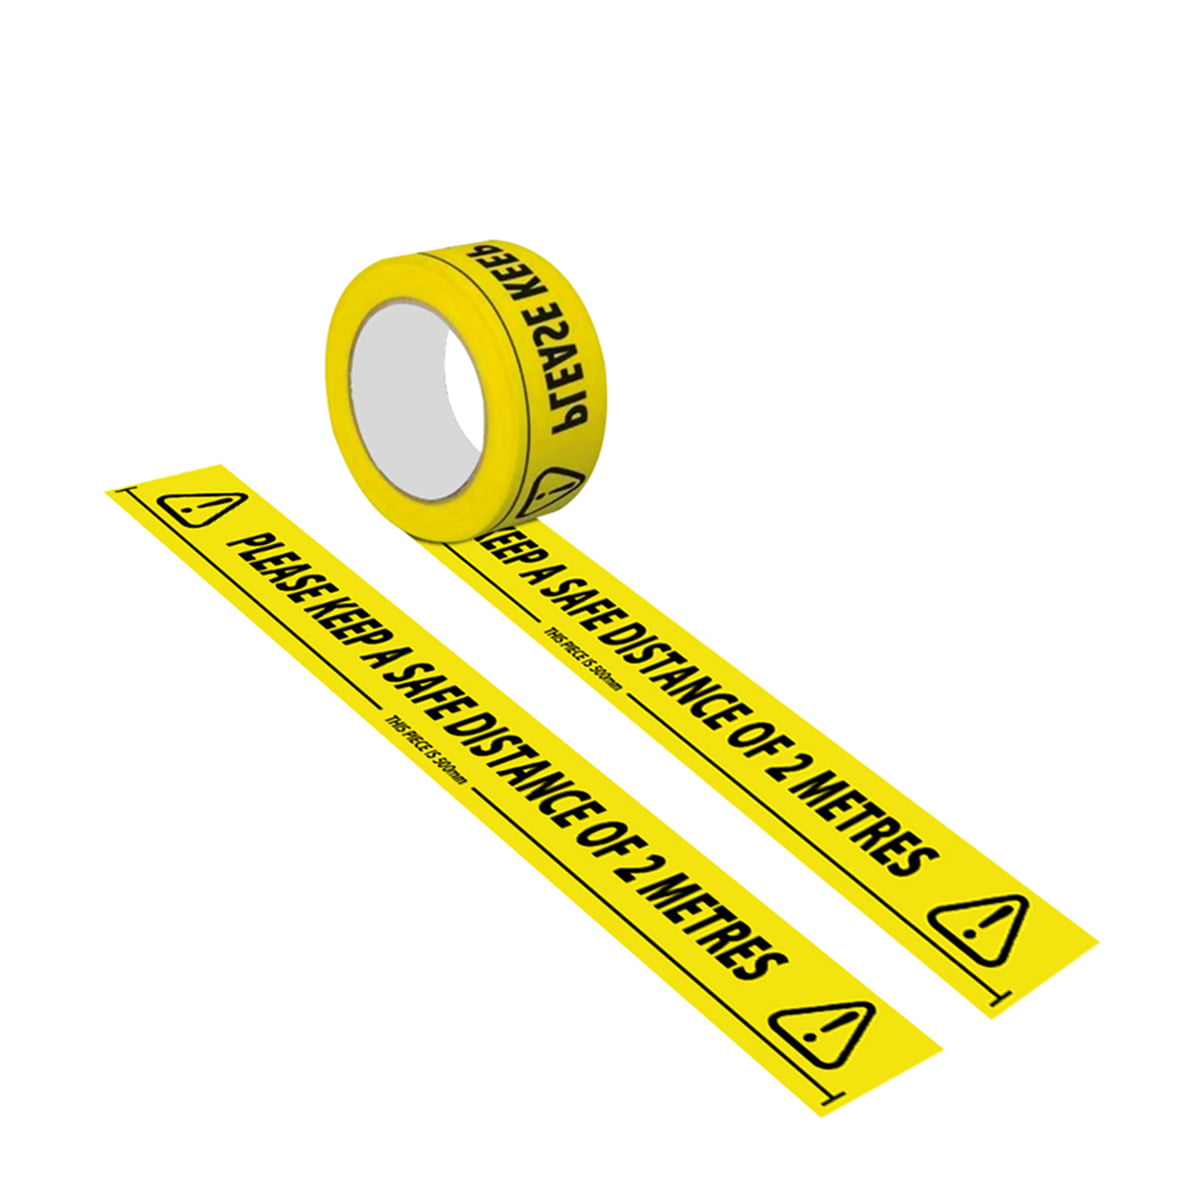 Triplast 'Please Keep A Safe Distance' Warning Floor Tape Single Roll Strong Yellow And Black Tape X-Long Roll 66-Metres Long